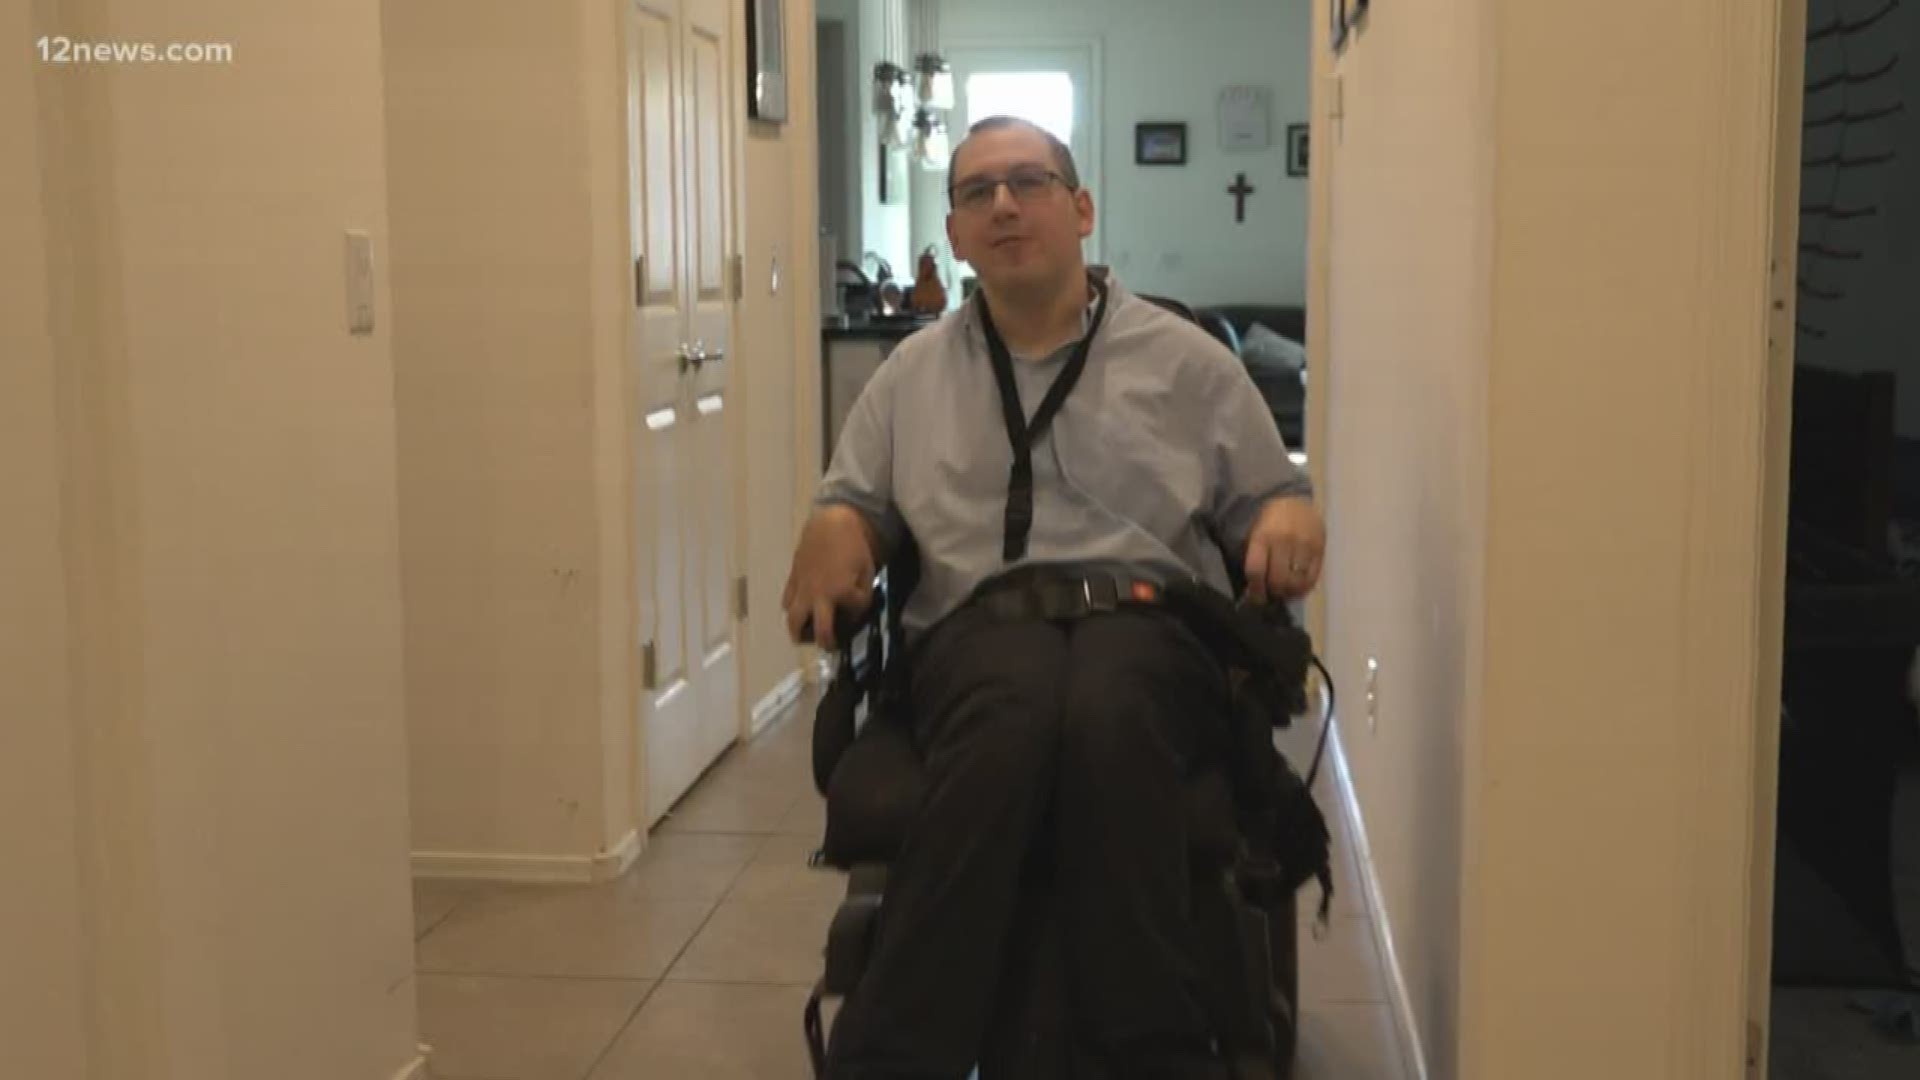 Arizona is missing out on millions by not employing more people with disabilities. A study at UMass Boston says the state's GDP could increase by millions.